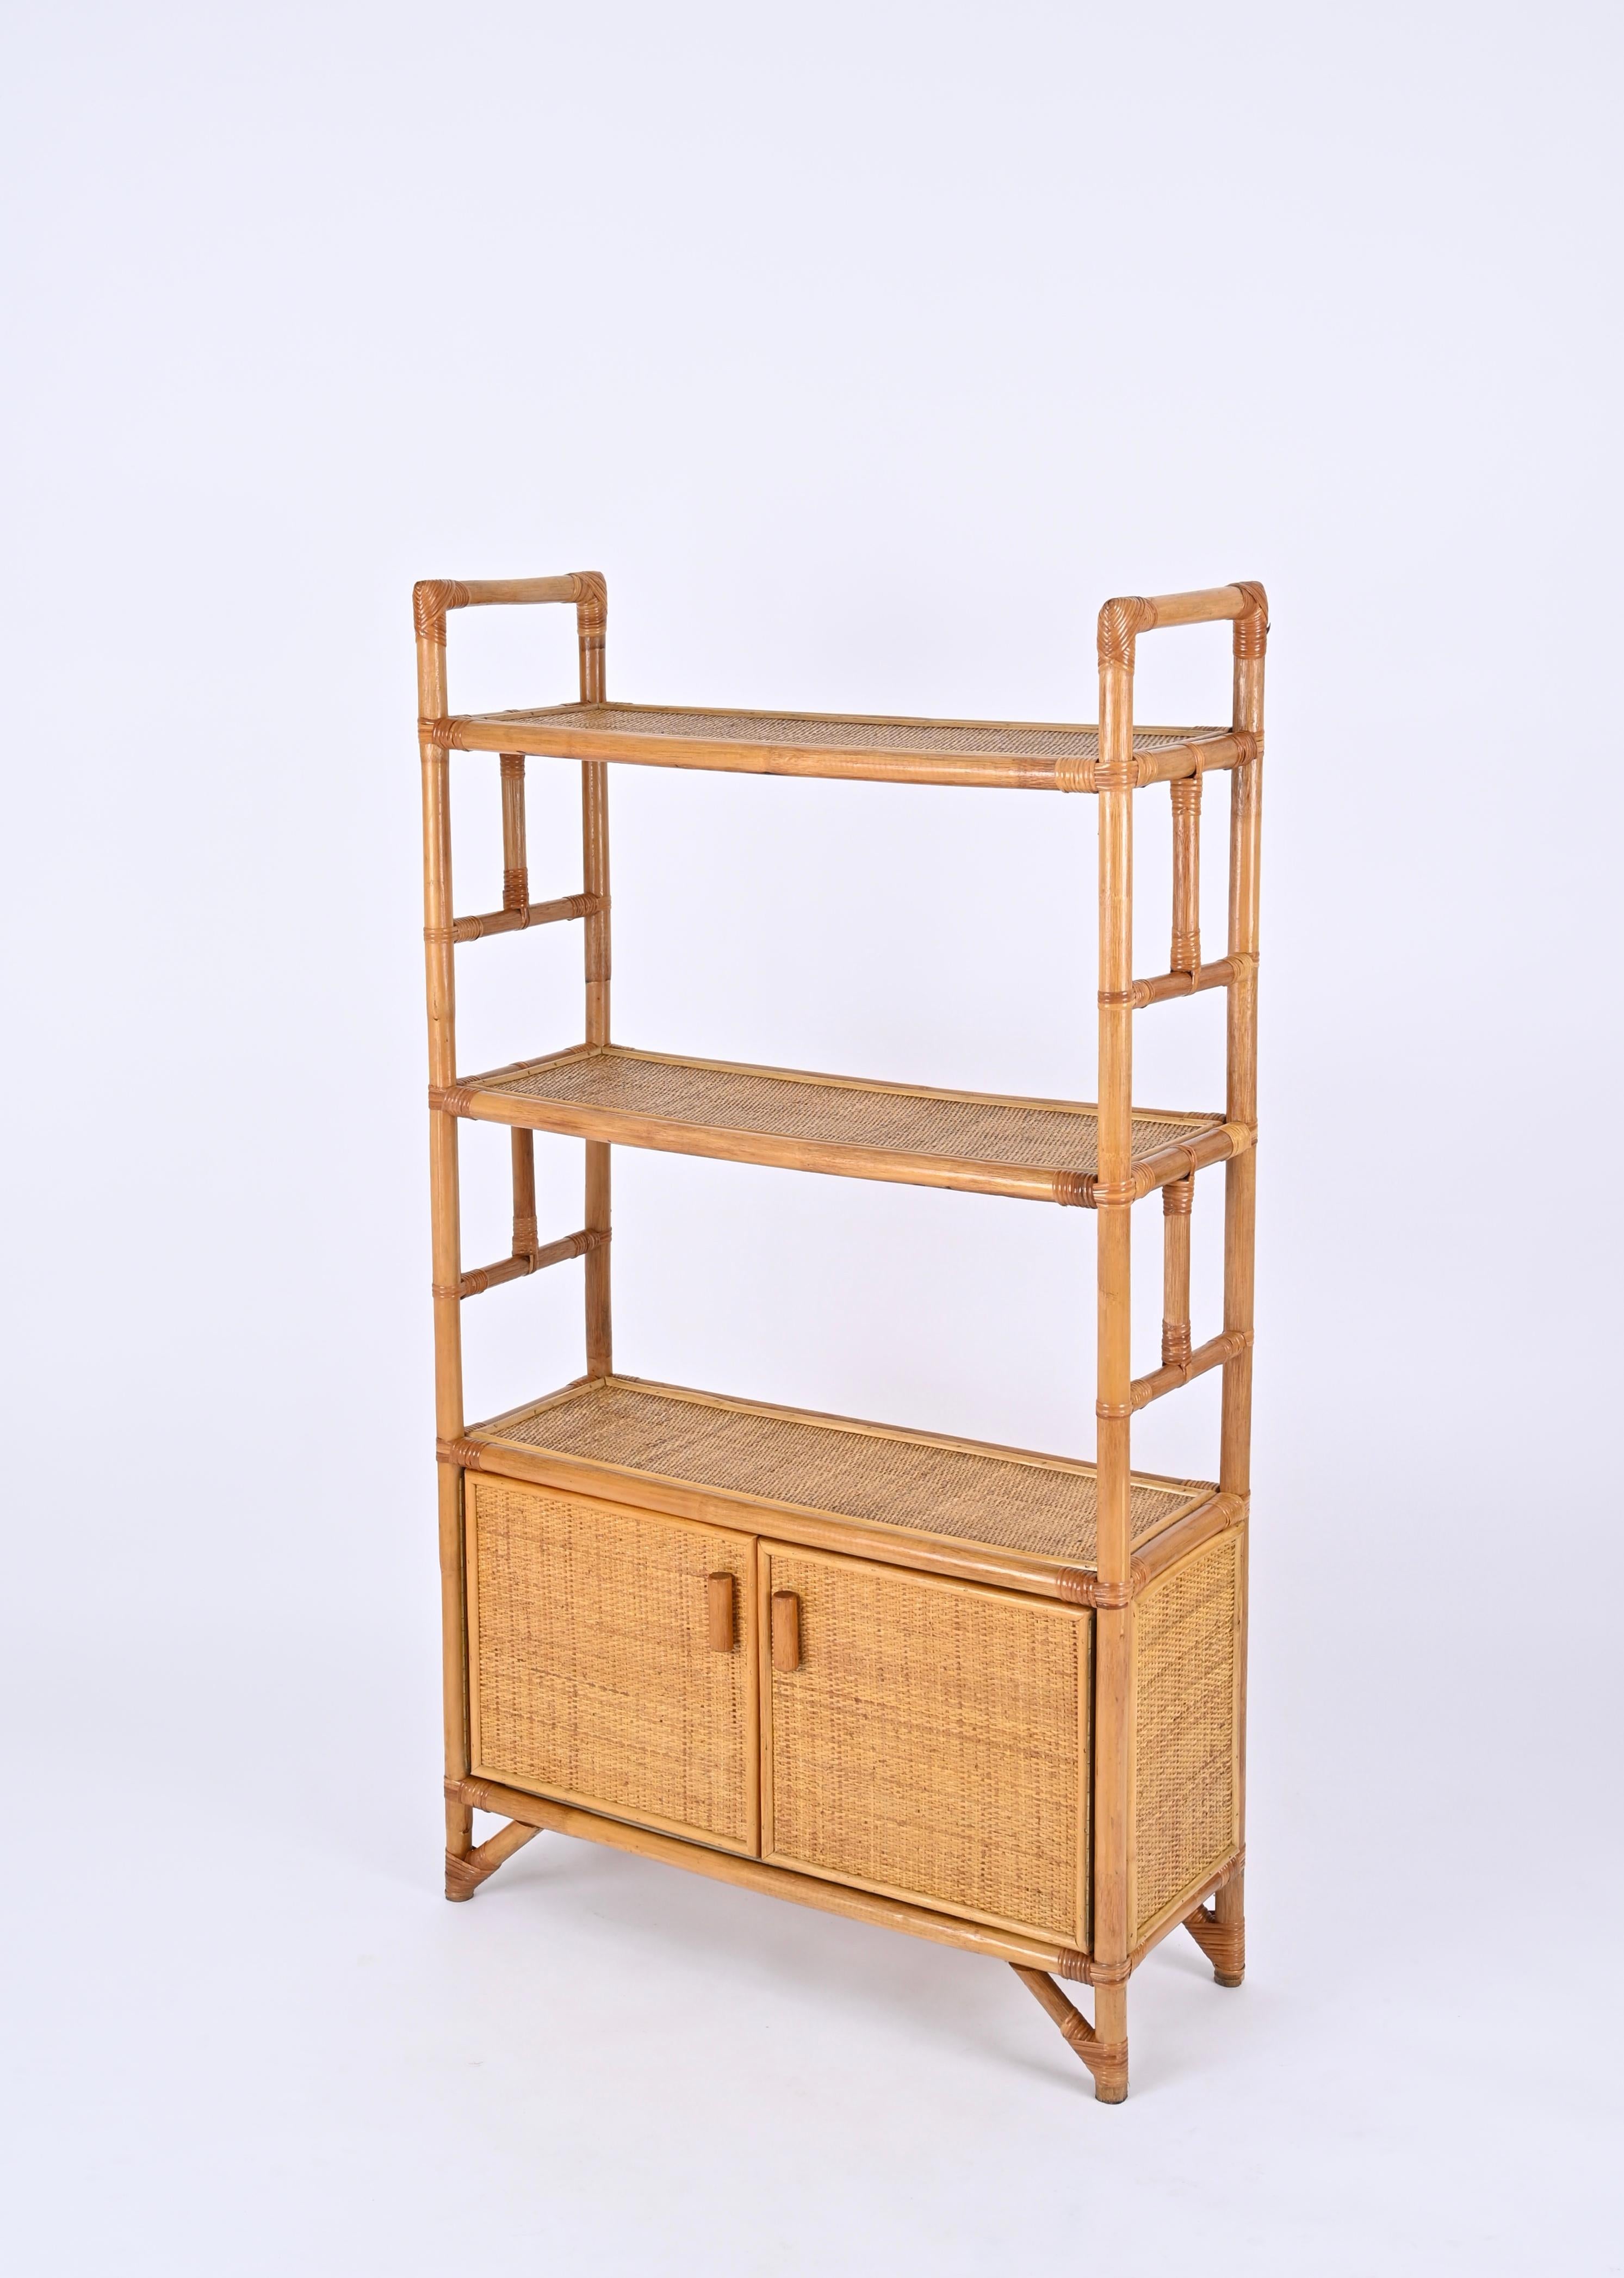 Midcentury Italian Modern Rattan and Bamboo Bookcase with Doors, 1970s For Sale 5